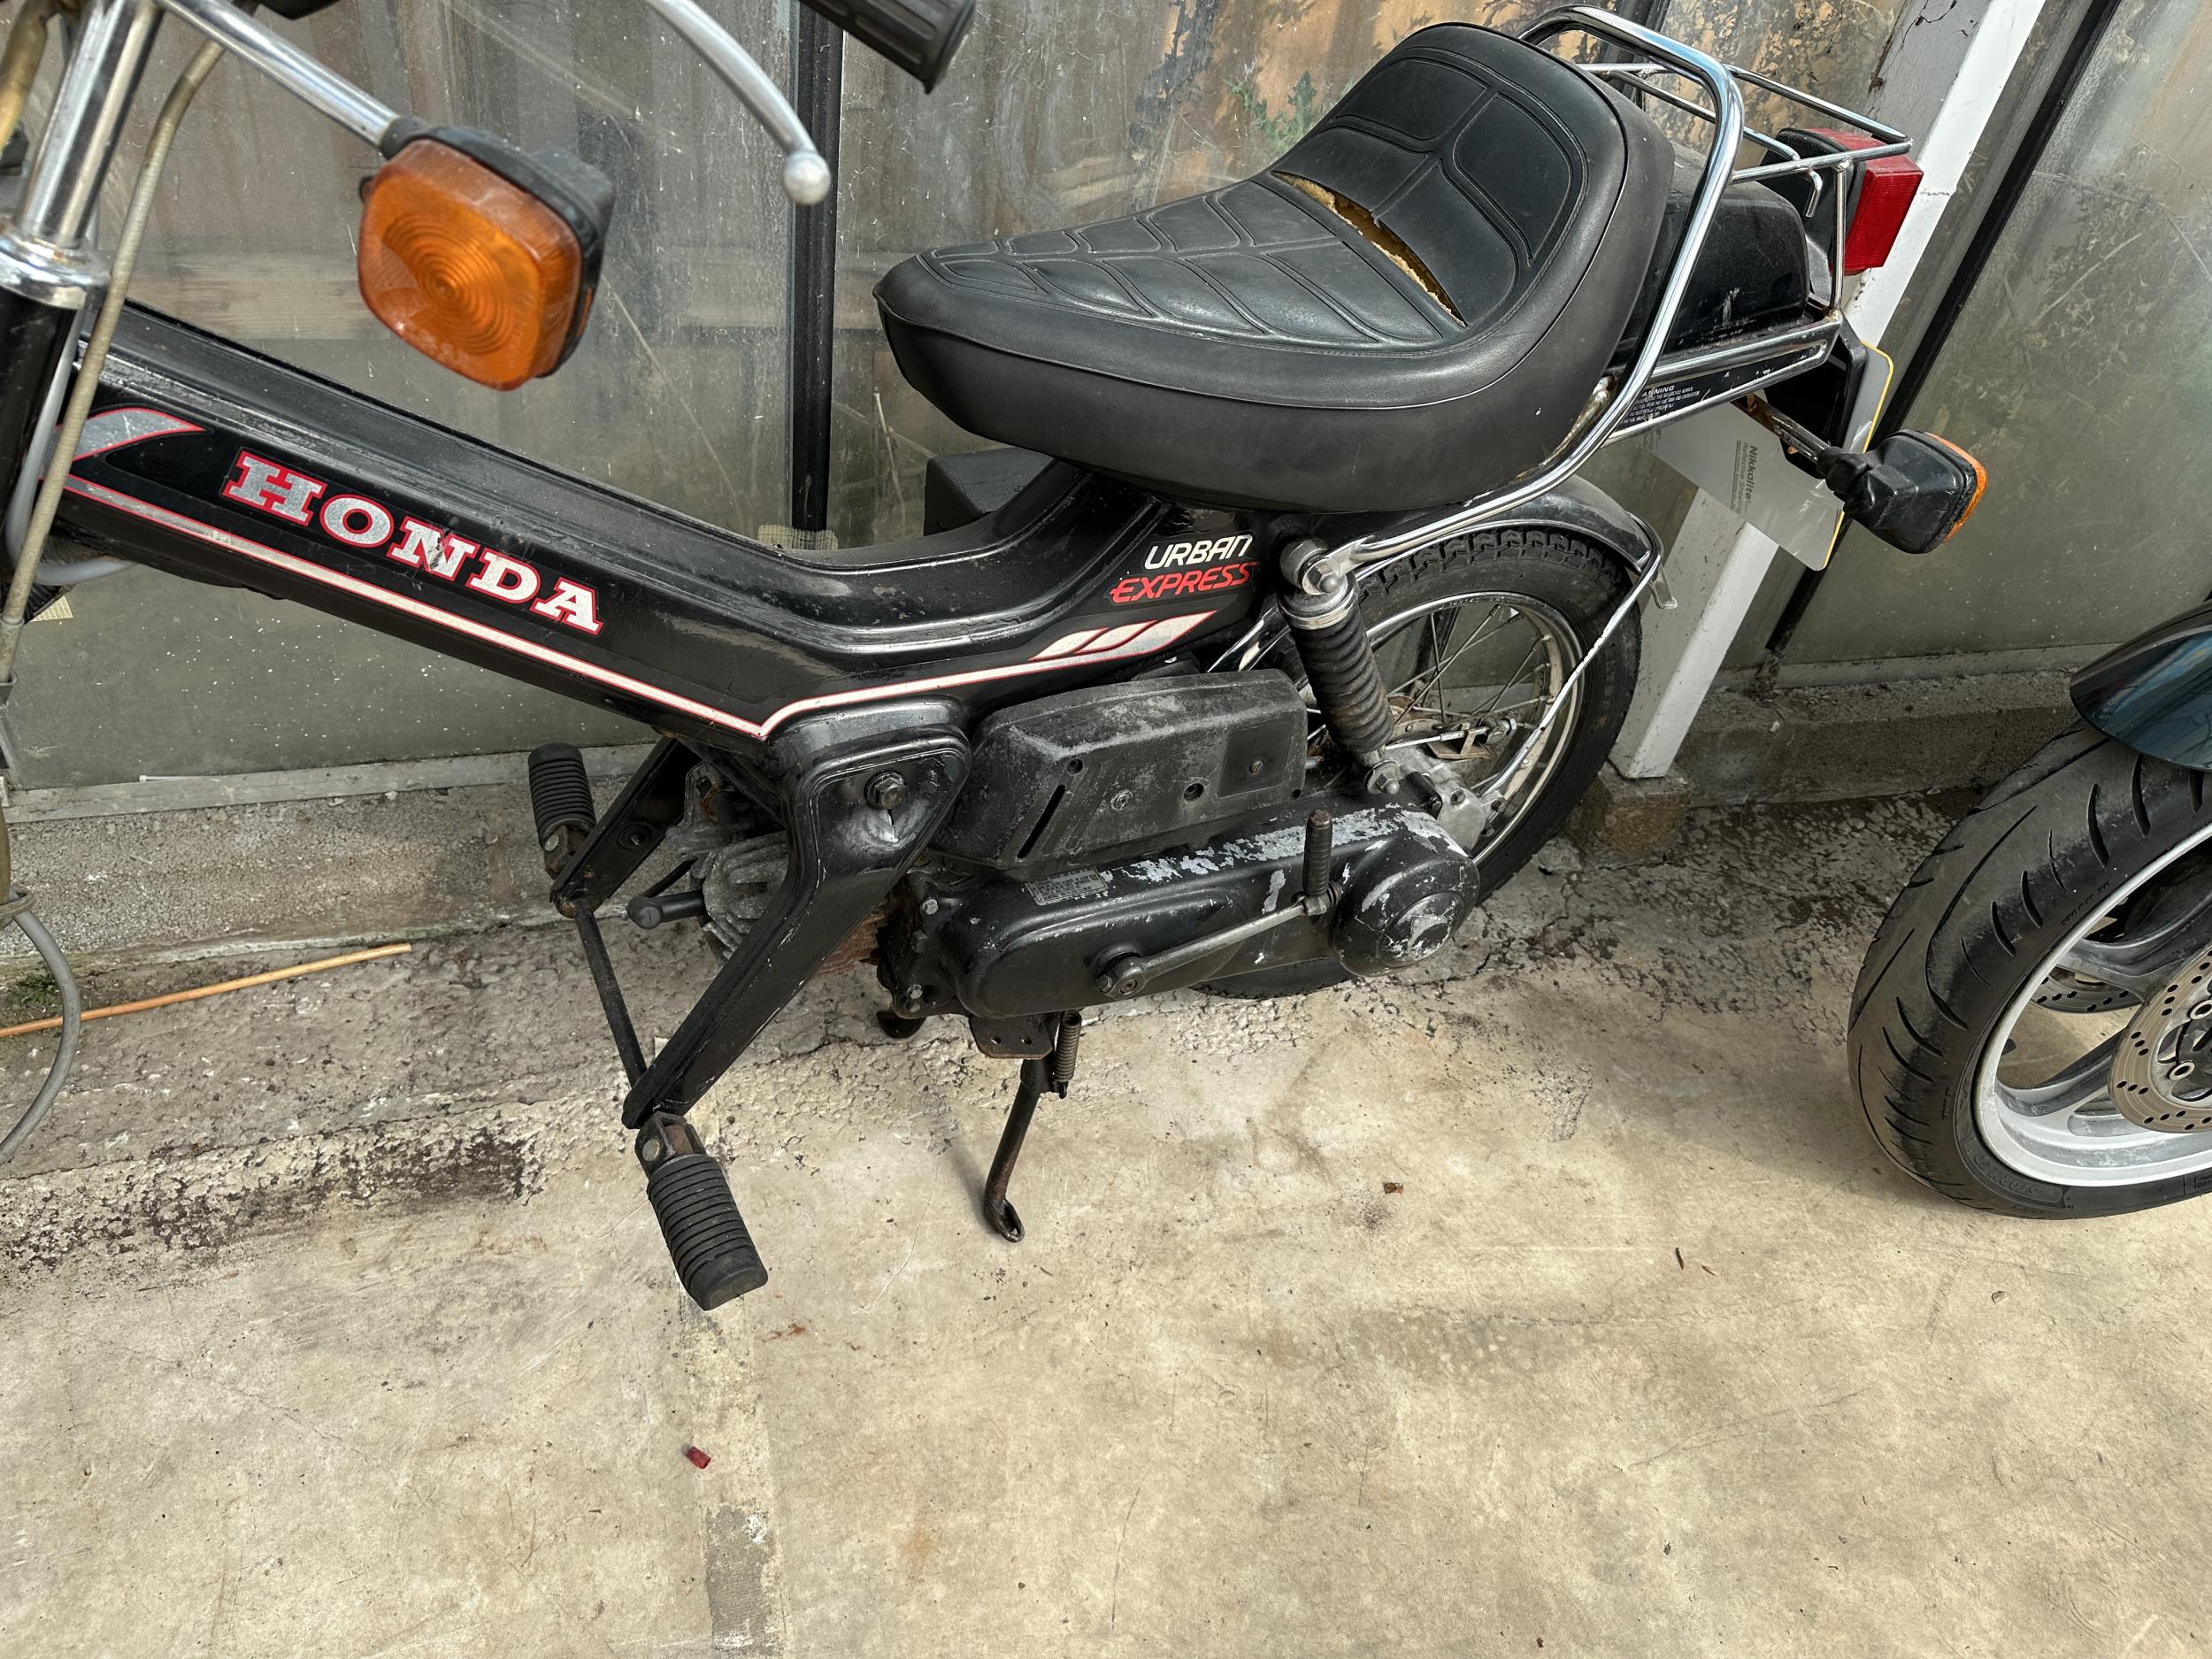 A 1982 HONDA URBAN EXPRESS 50CC MOPED, KICK START, AUTOMATIC, COMPLETE WITH V5C, MADE FOR THE USA - Image 5 of 10